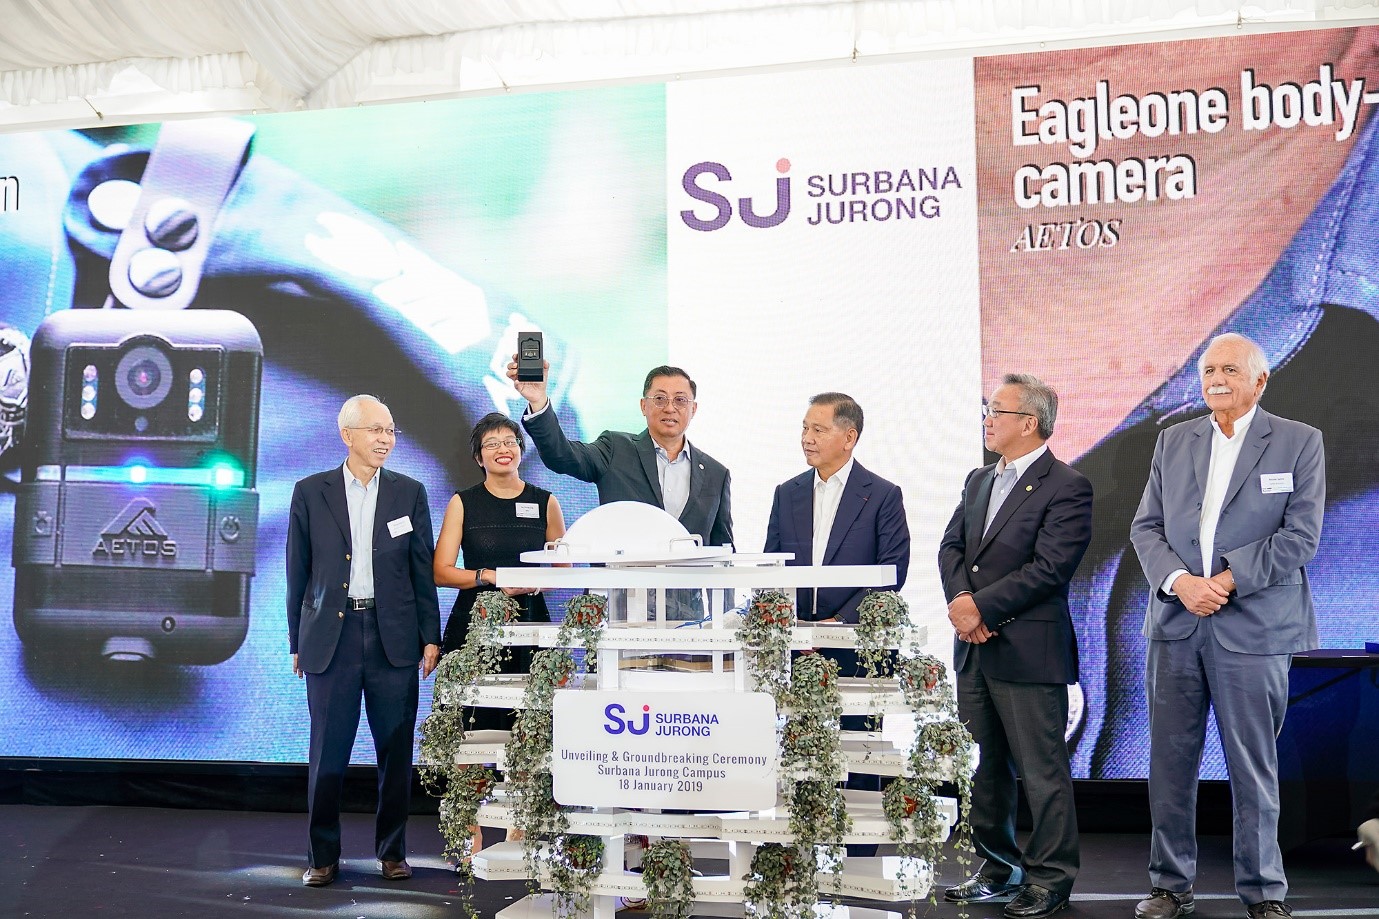 Surbana Jurong Campus time capsule unveiling